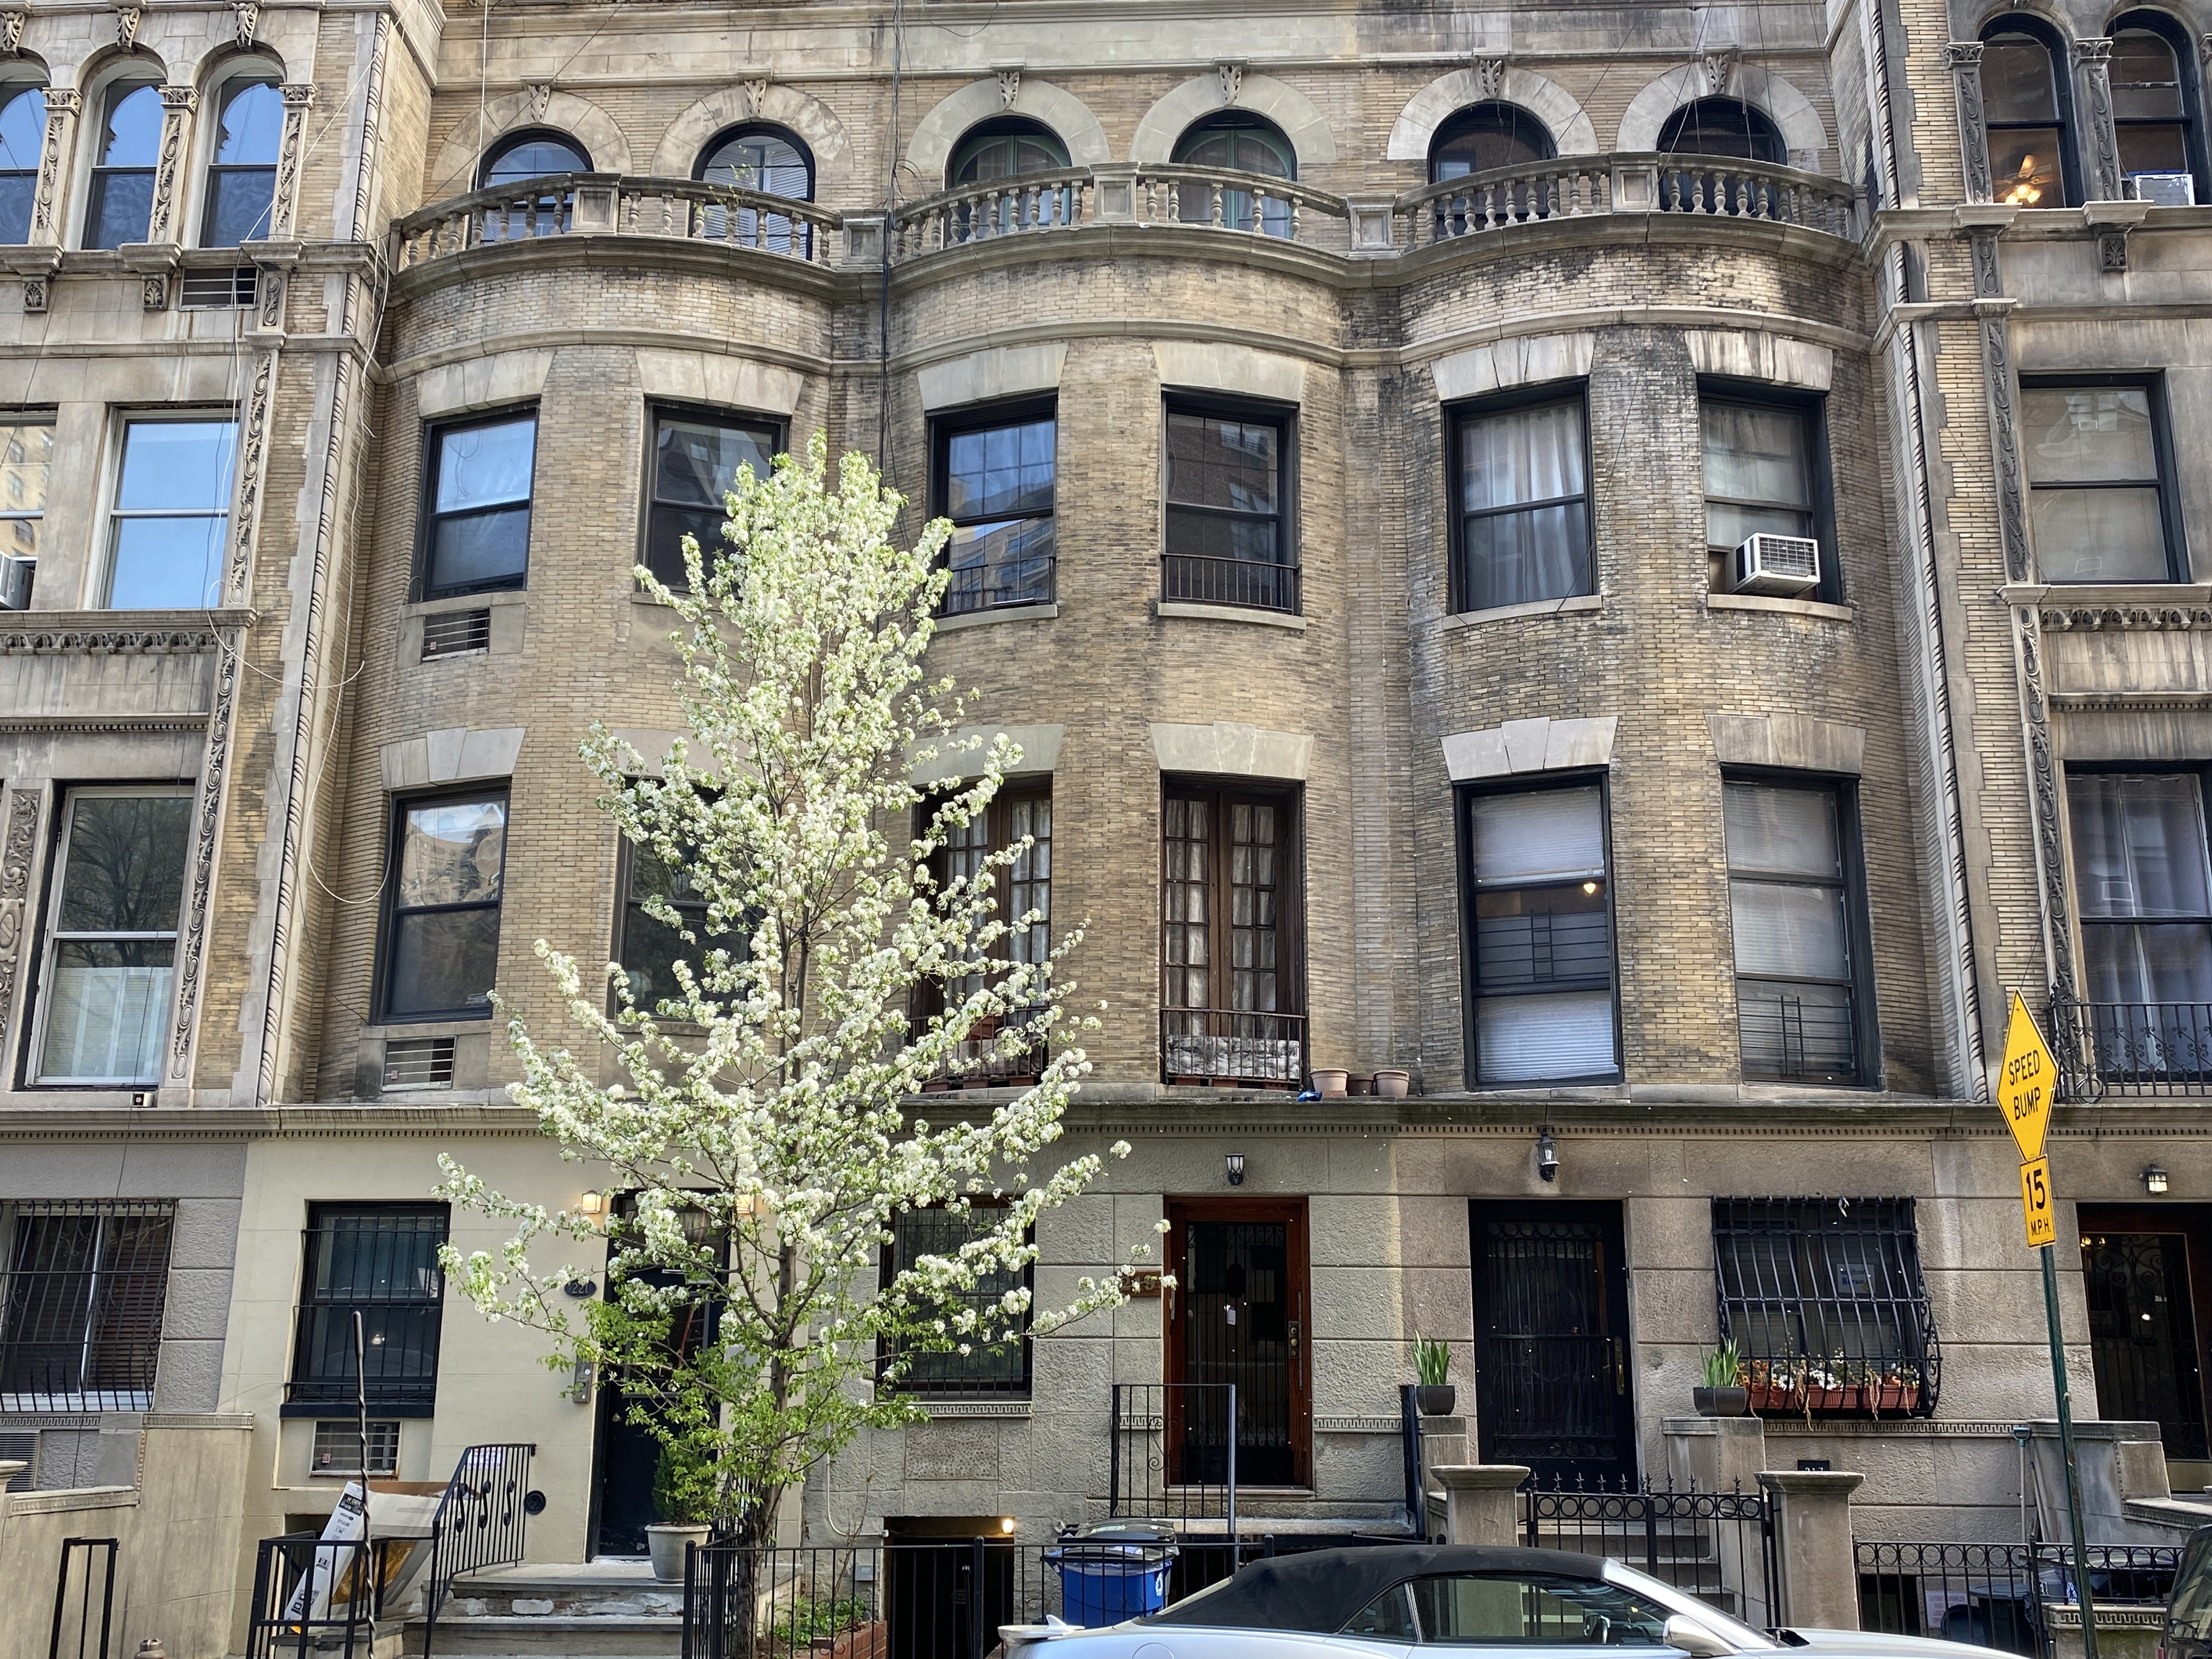 A flowering tree on an Upper West Side street with townhouses in the background